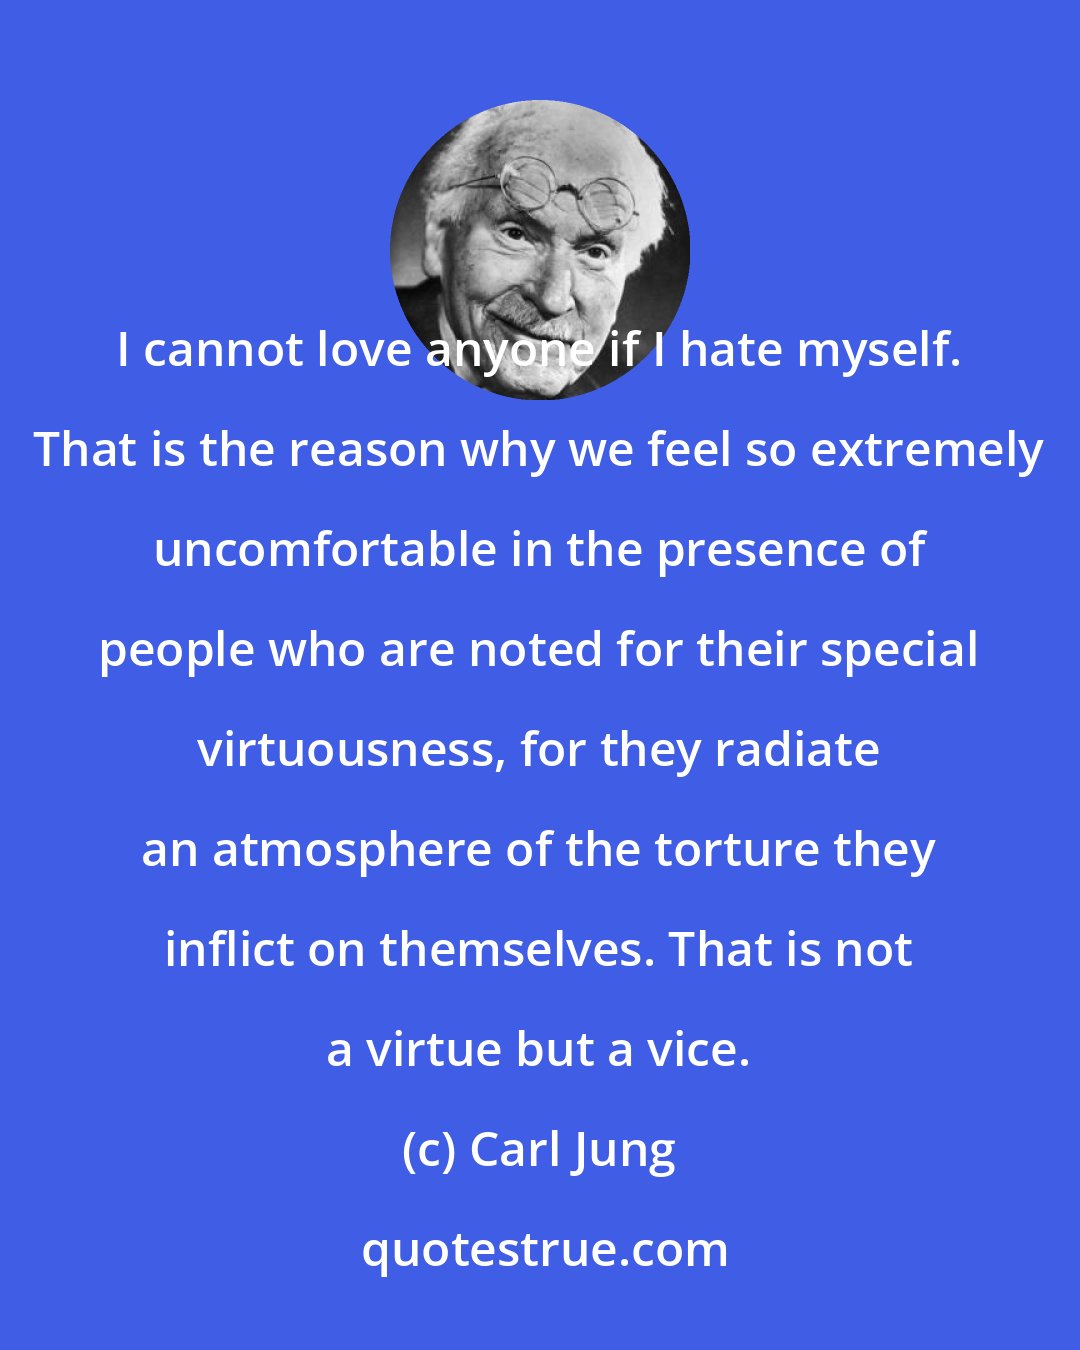 Carl Jung: I cannot love anyone if I hate myself. That is the reason why we feel so extremely uncomfortable in the presence of people who are noted for their special virtuousness, for they radiate an atmosphere of the torture they inflict on themselves. That is not a virtue but a vice.